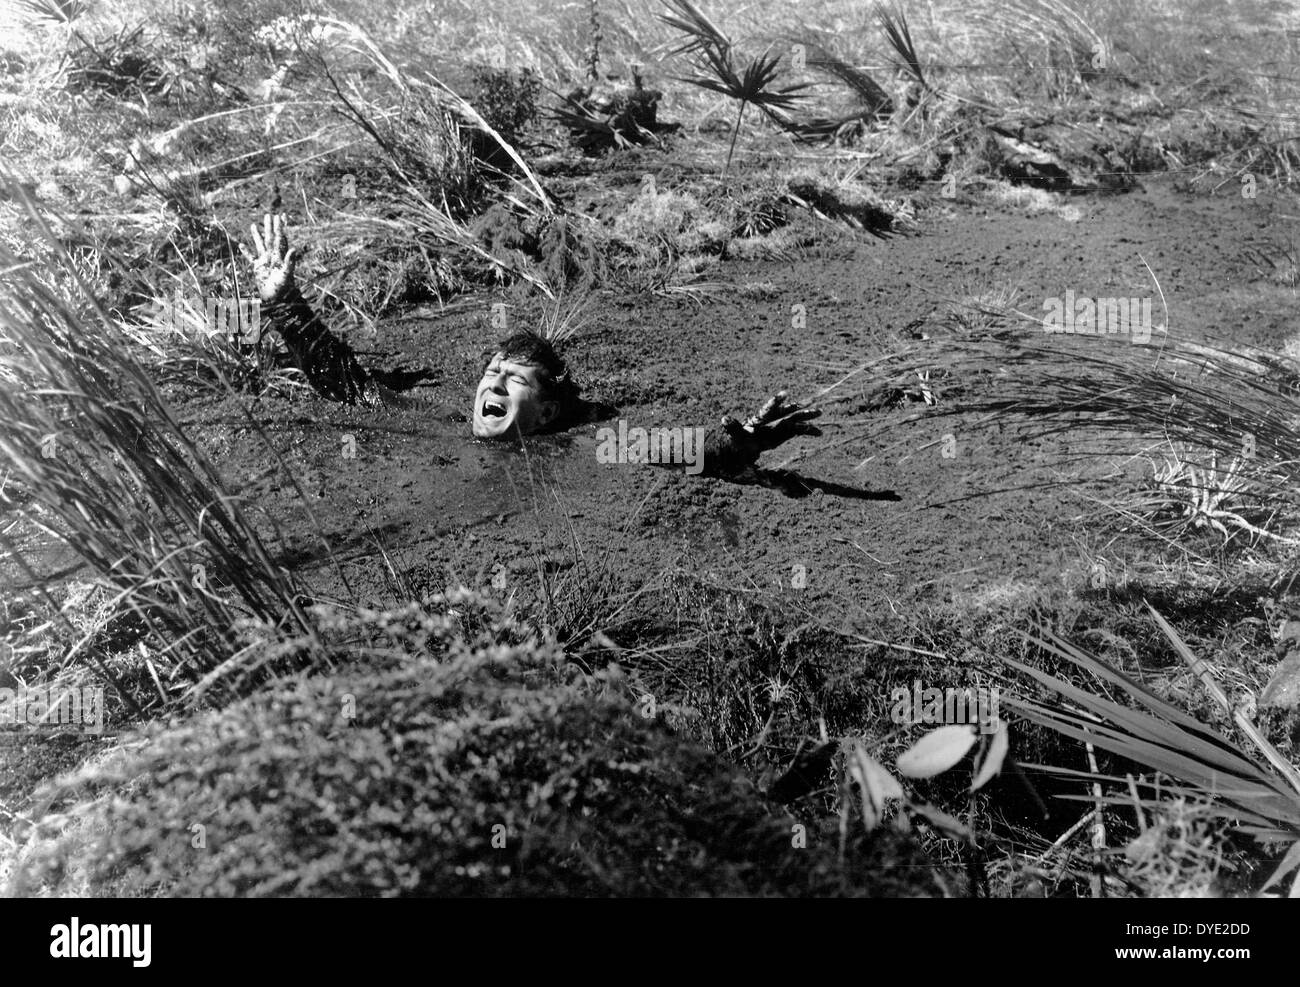 Man Sinking In Quicksand On Set Of The Film Two Thousand